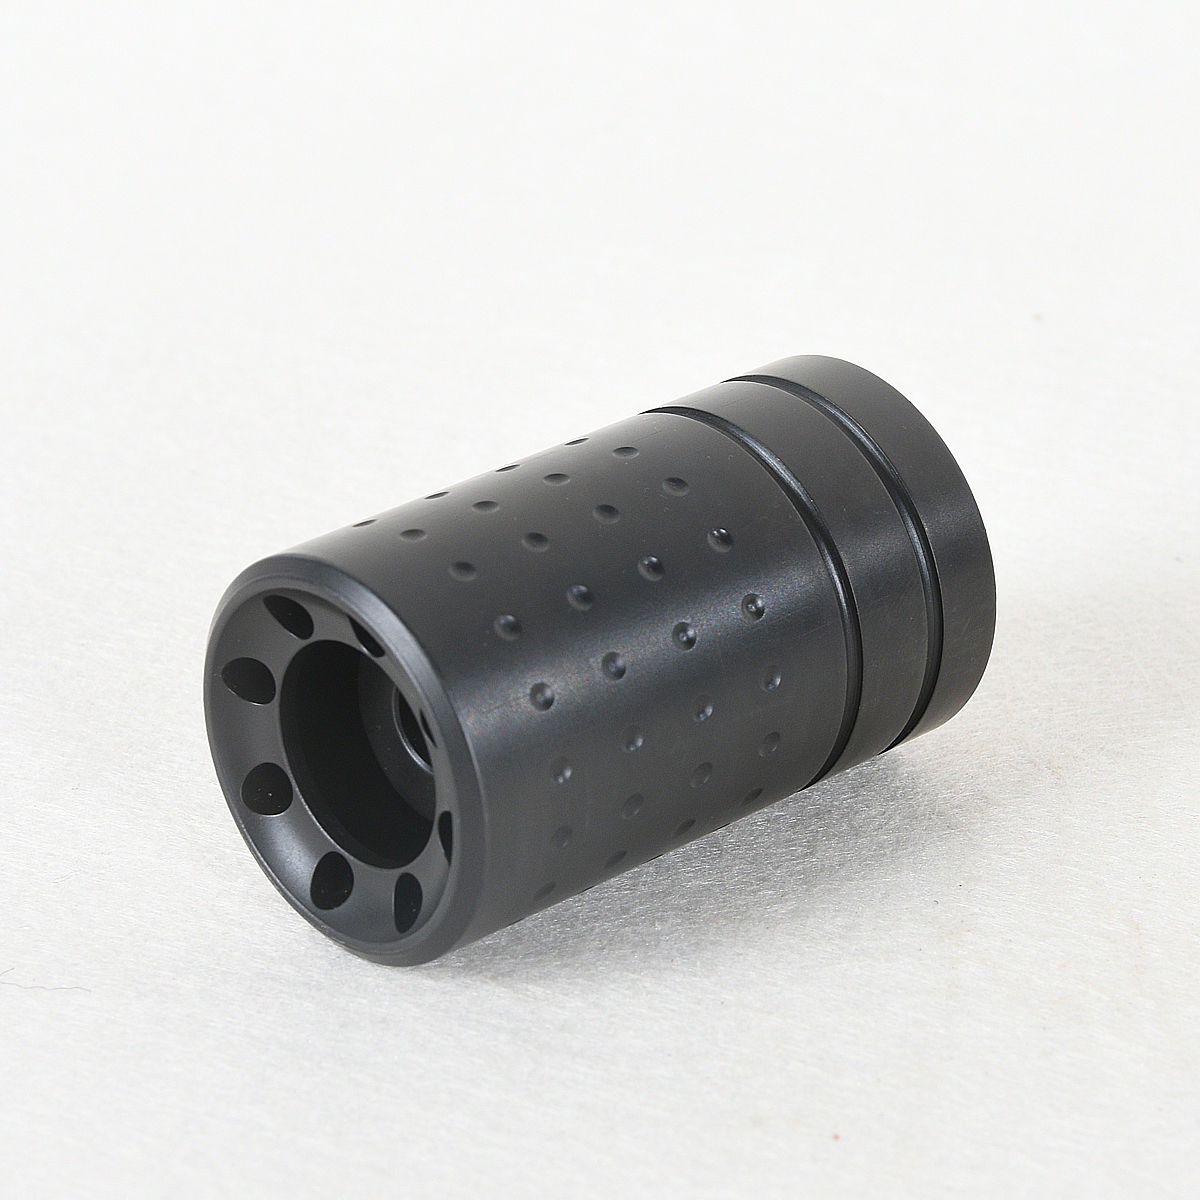 Cnc Precision Steel 308 7 62 5 8x24 Rh Tpi Muzzle Brake With 1 43inch Sound Sleeve Can